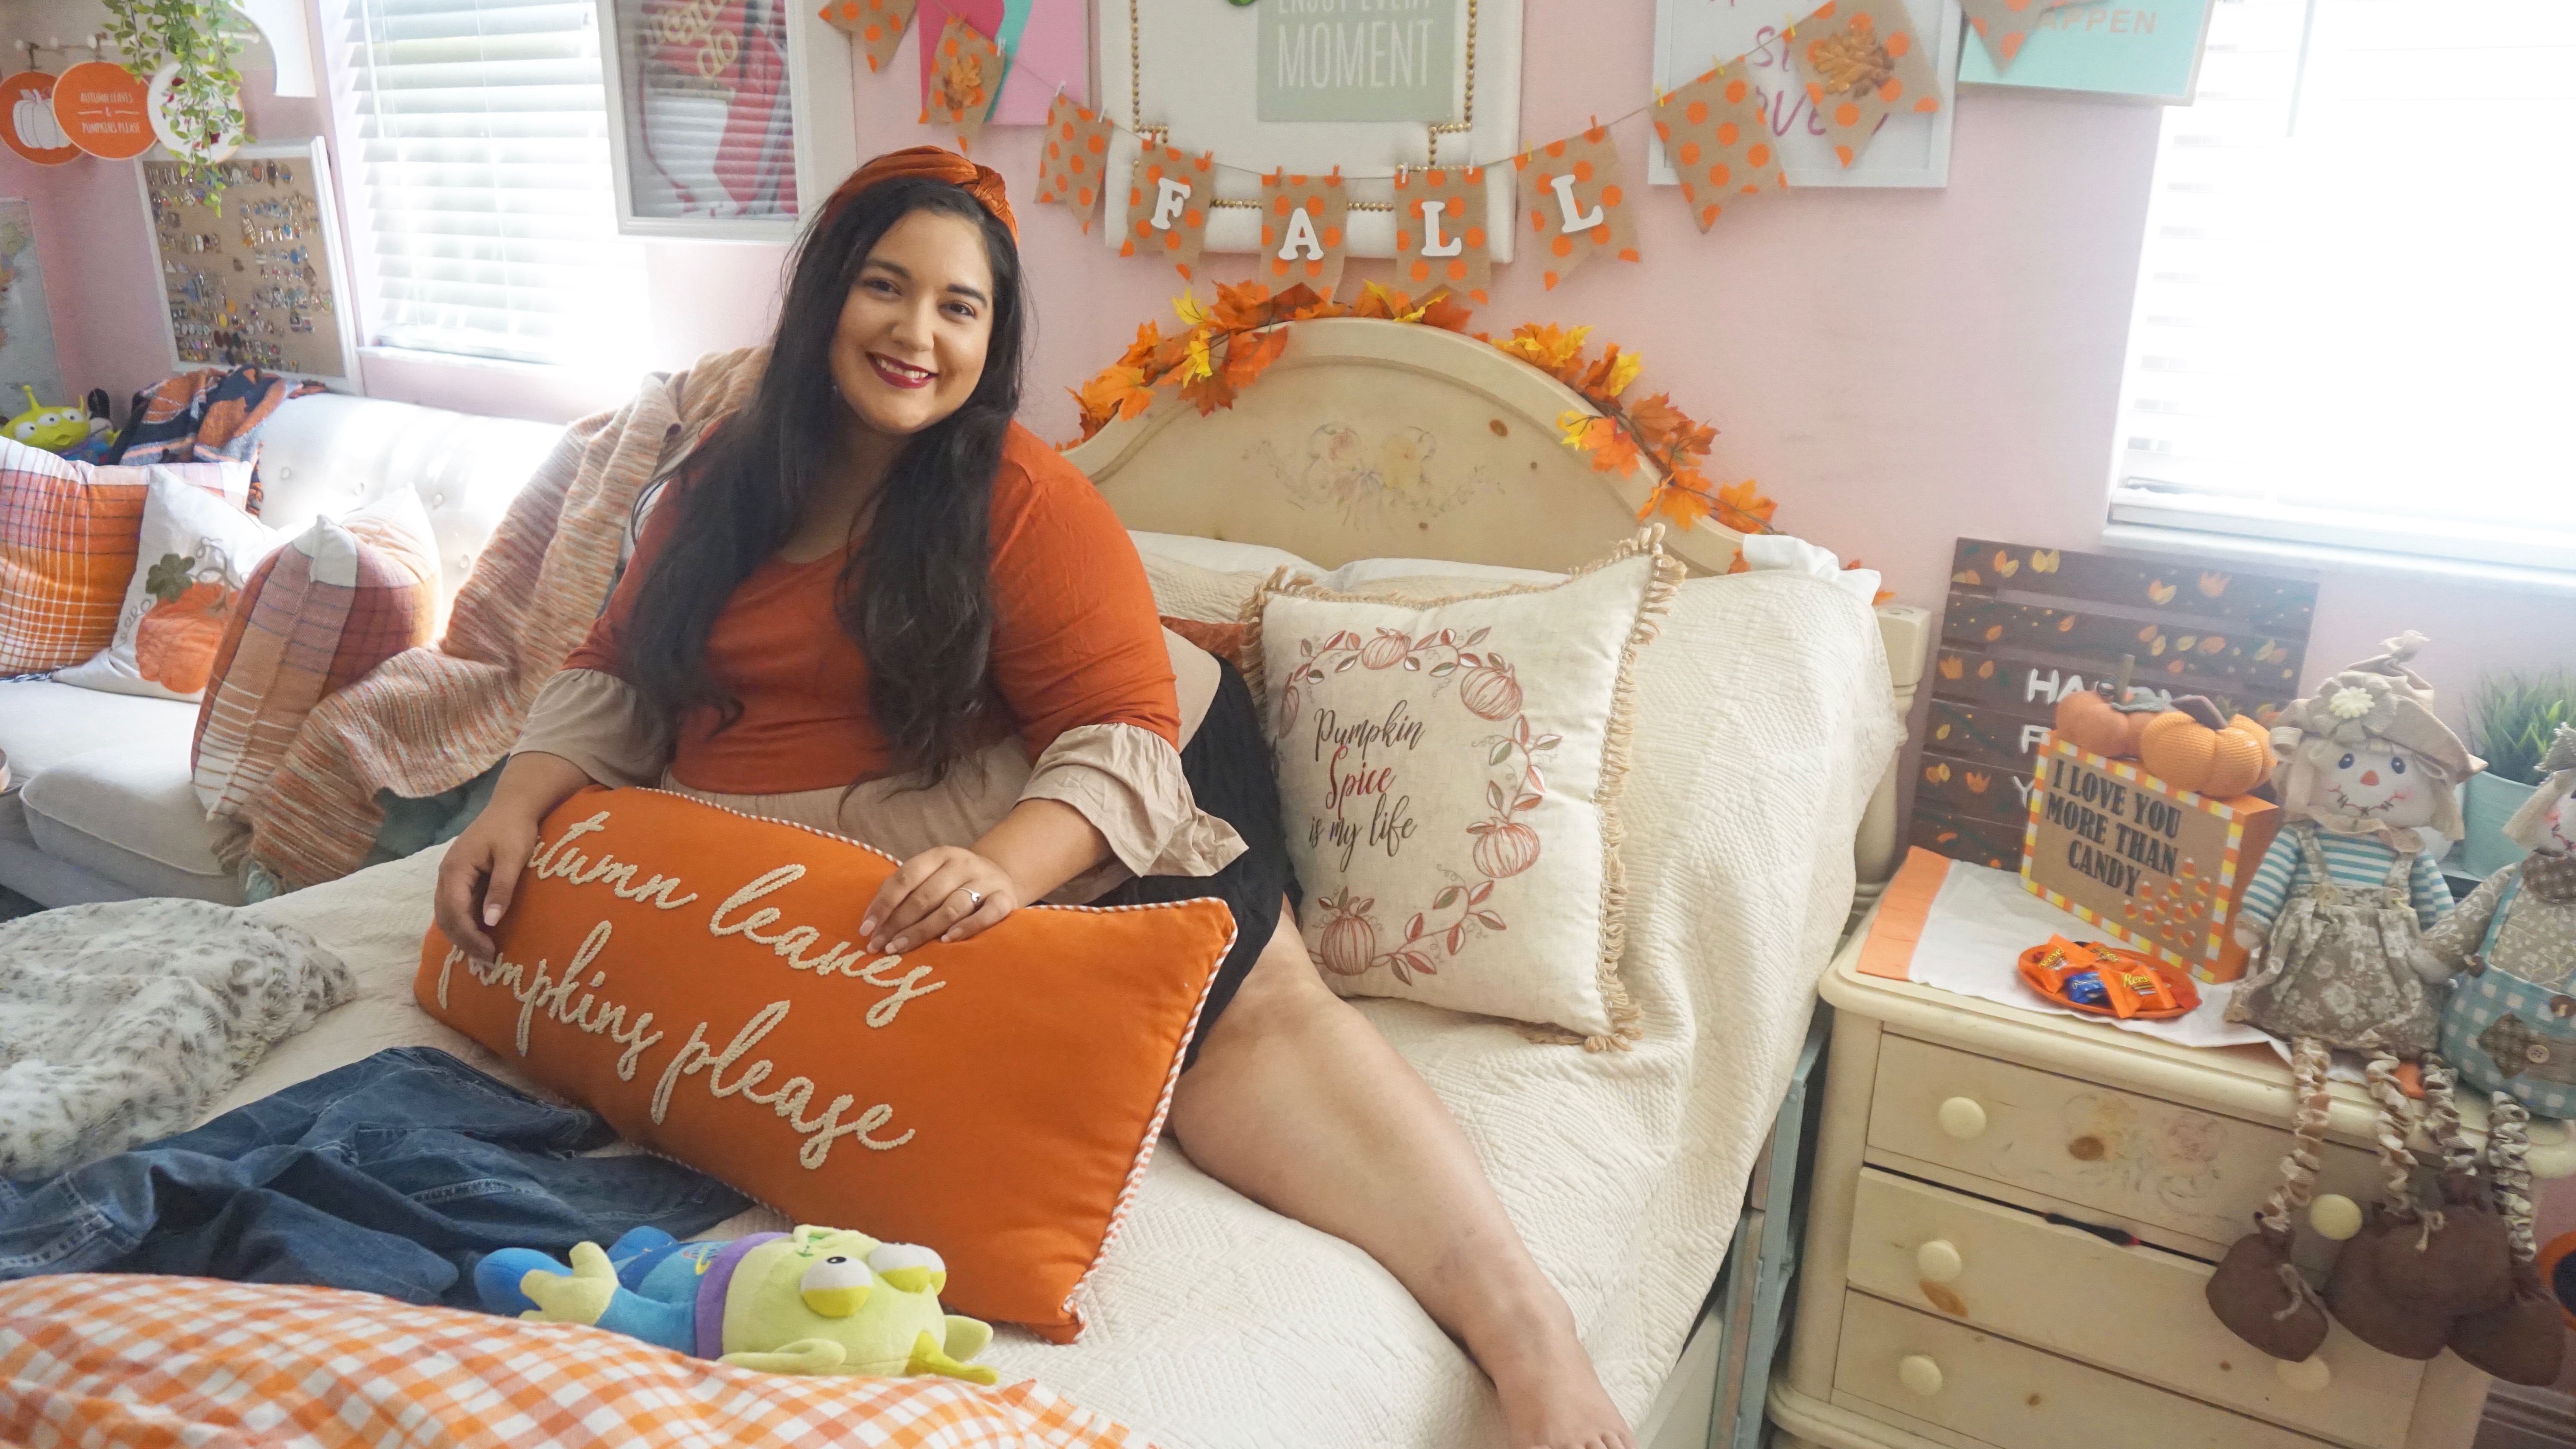 How To Make Your Room Cozy For Fall! | Fall Decor 2019